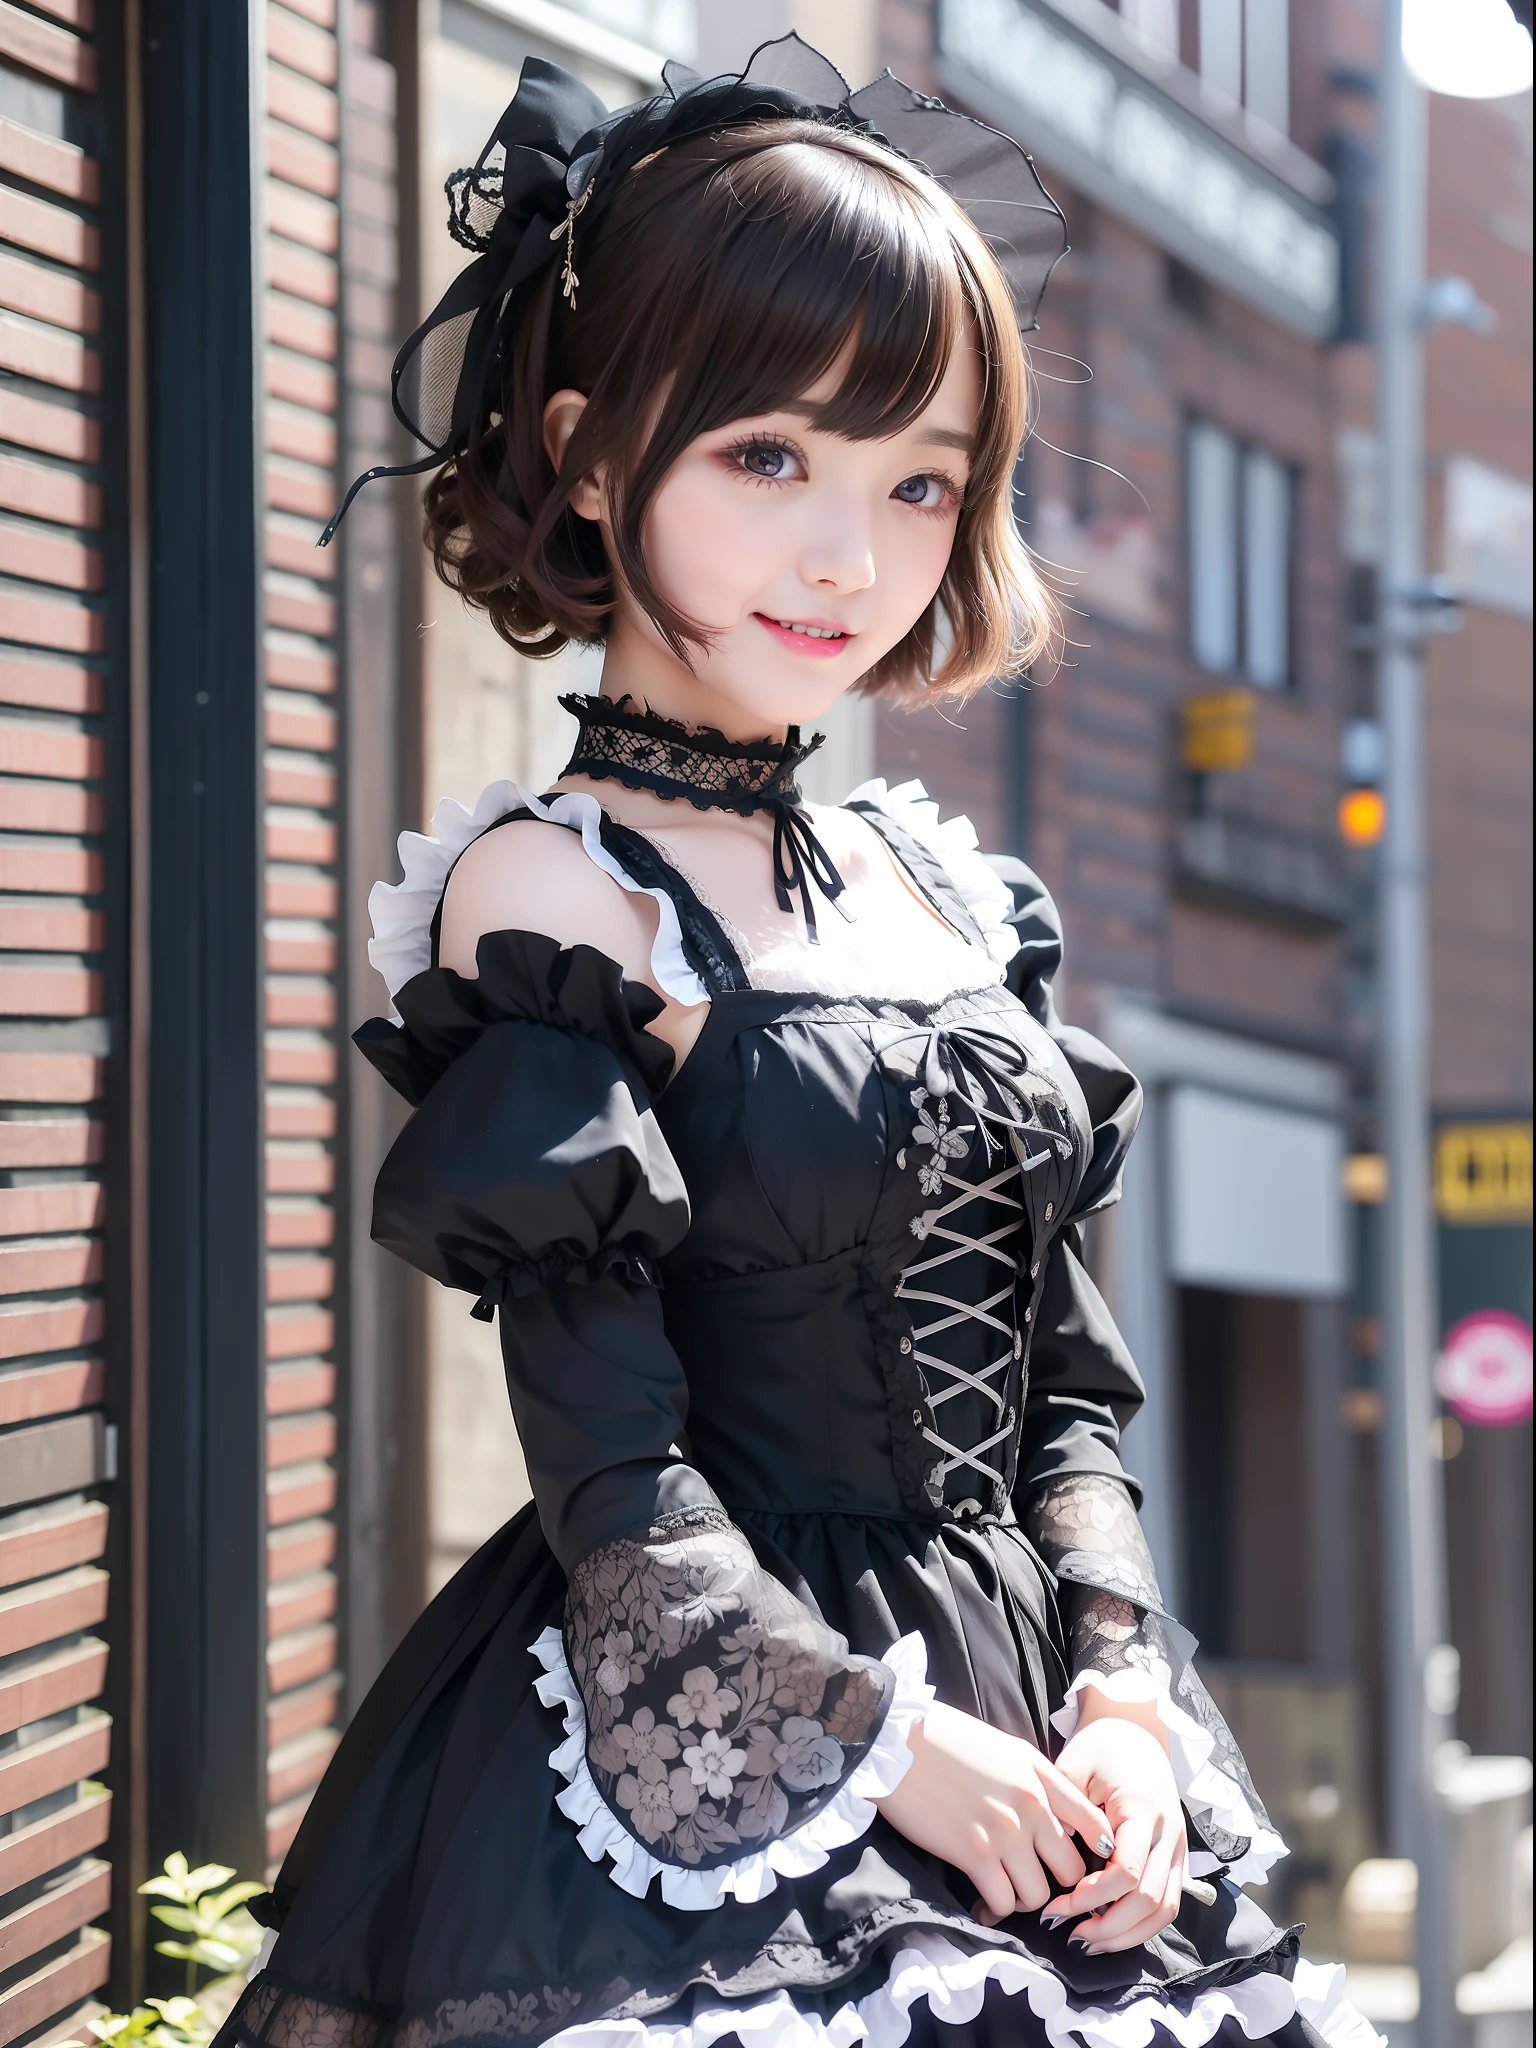 1 girl, solo, (short hair), japanese idol, perfect figure, beautiful eyes double eyelids, gothic lolita fashion, 26 years old, downtown like Harajuku, broad smile, upper body, blow a wind, slim body